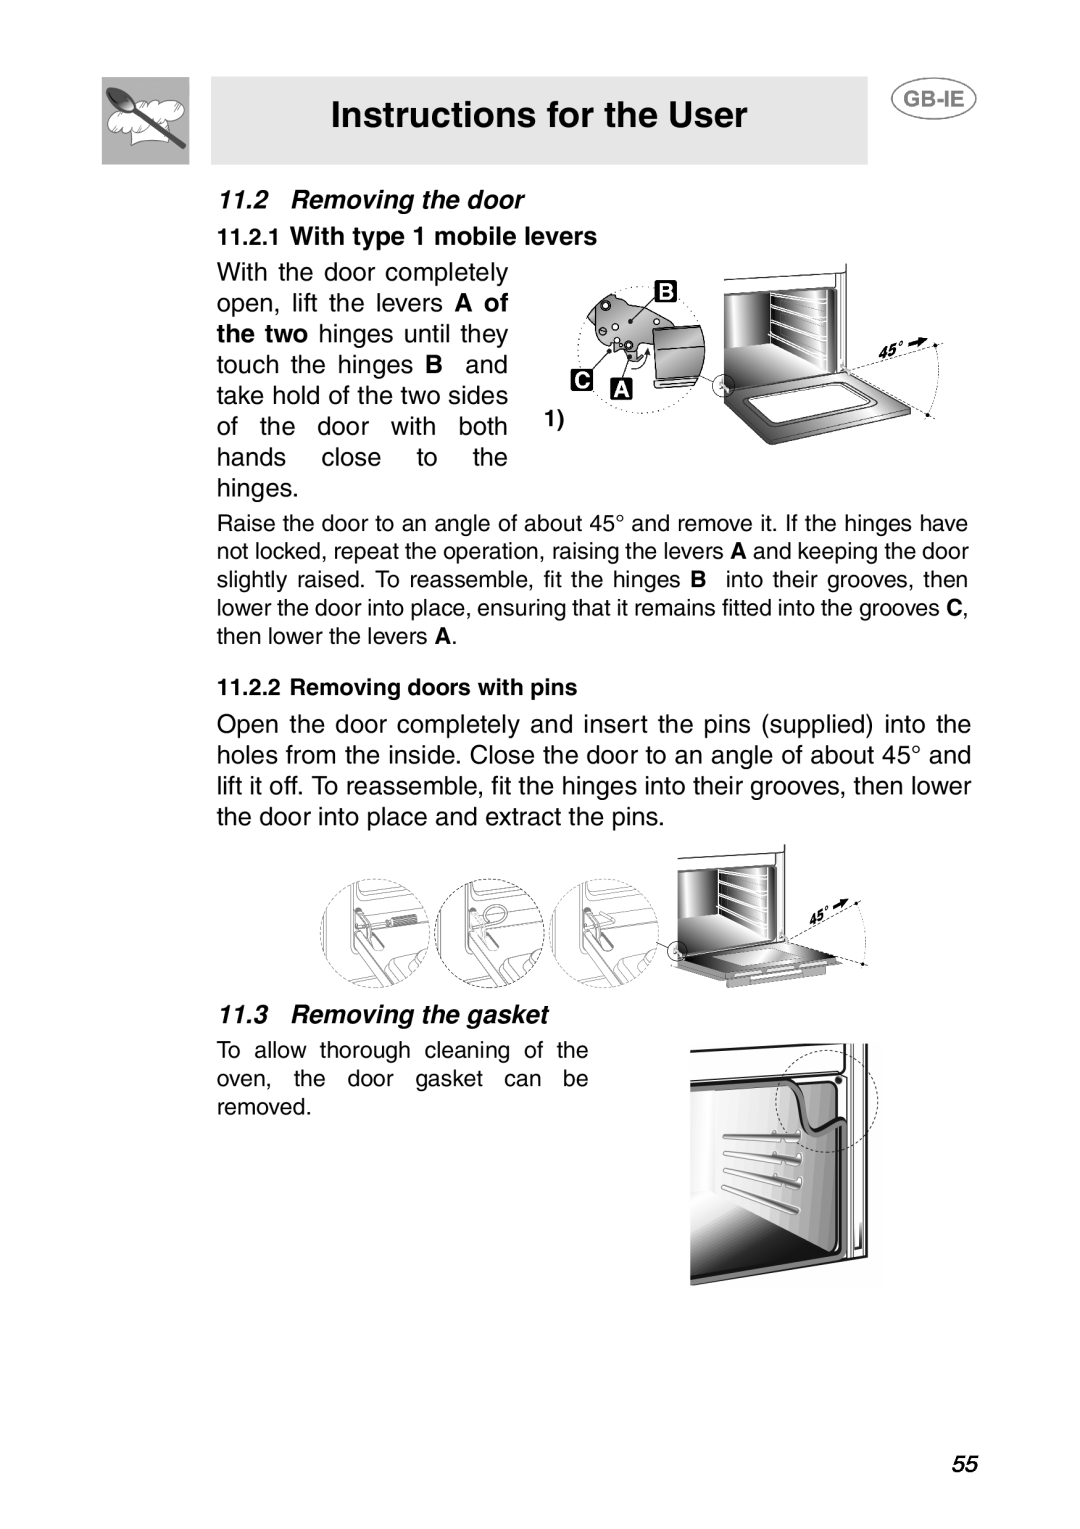 Smeg SCP108SG, SCP107AL manual Instructions for the User, Removing the door, With type 1 mobile levers, Removing the gasket 